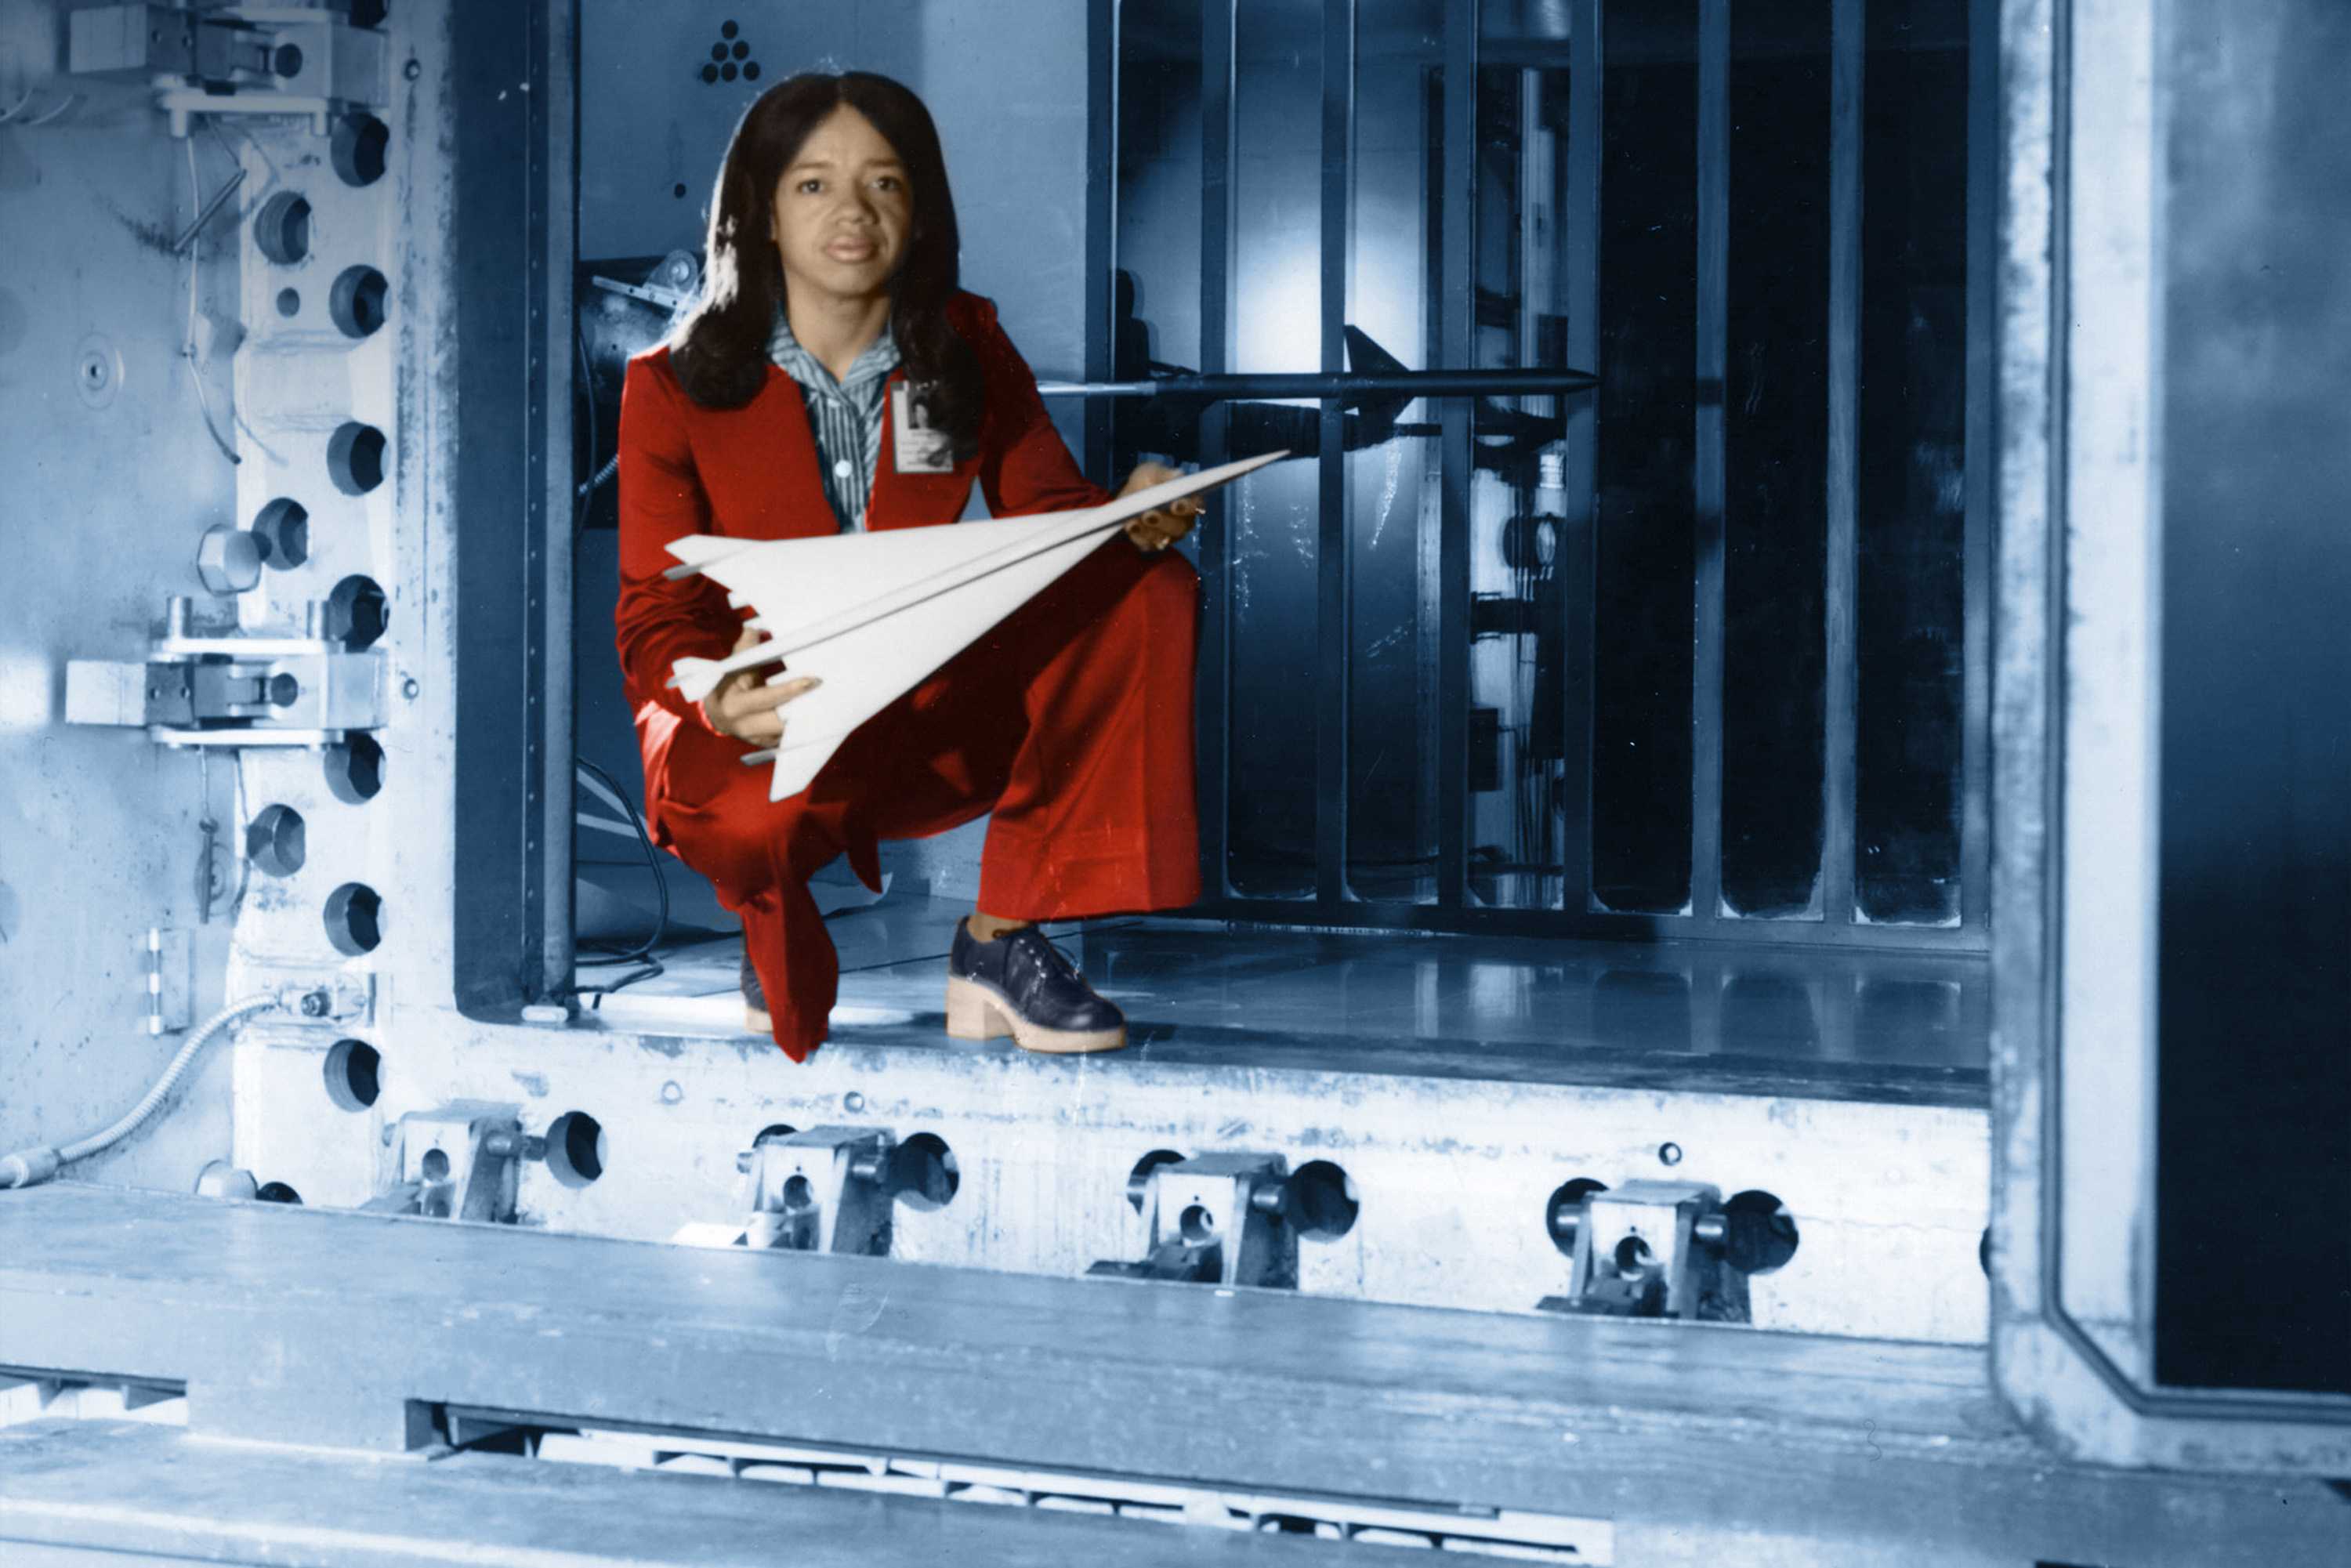 Christine Darden is crouching instead of metal structure as she poses for a photo. She is wearing a red suit.